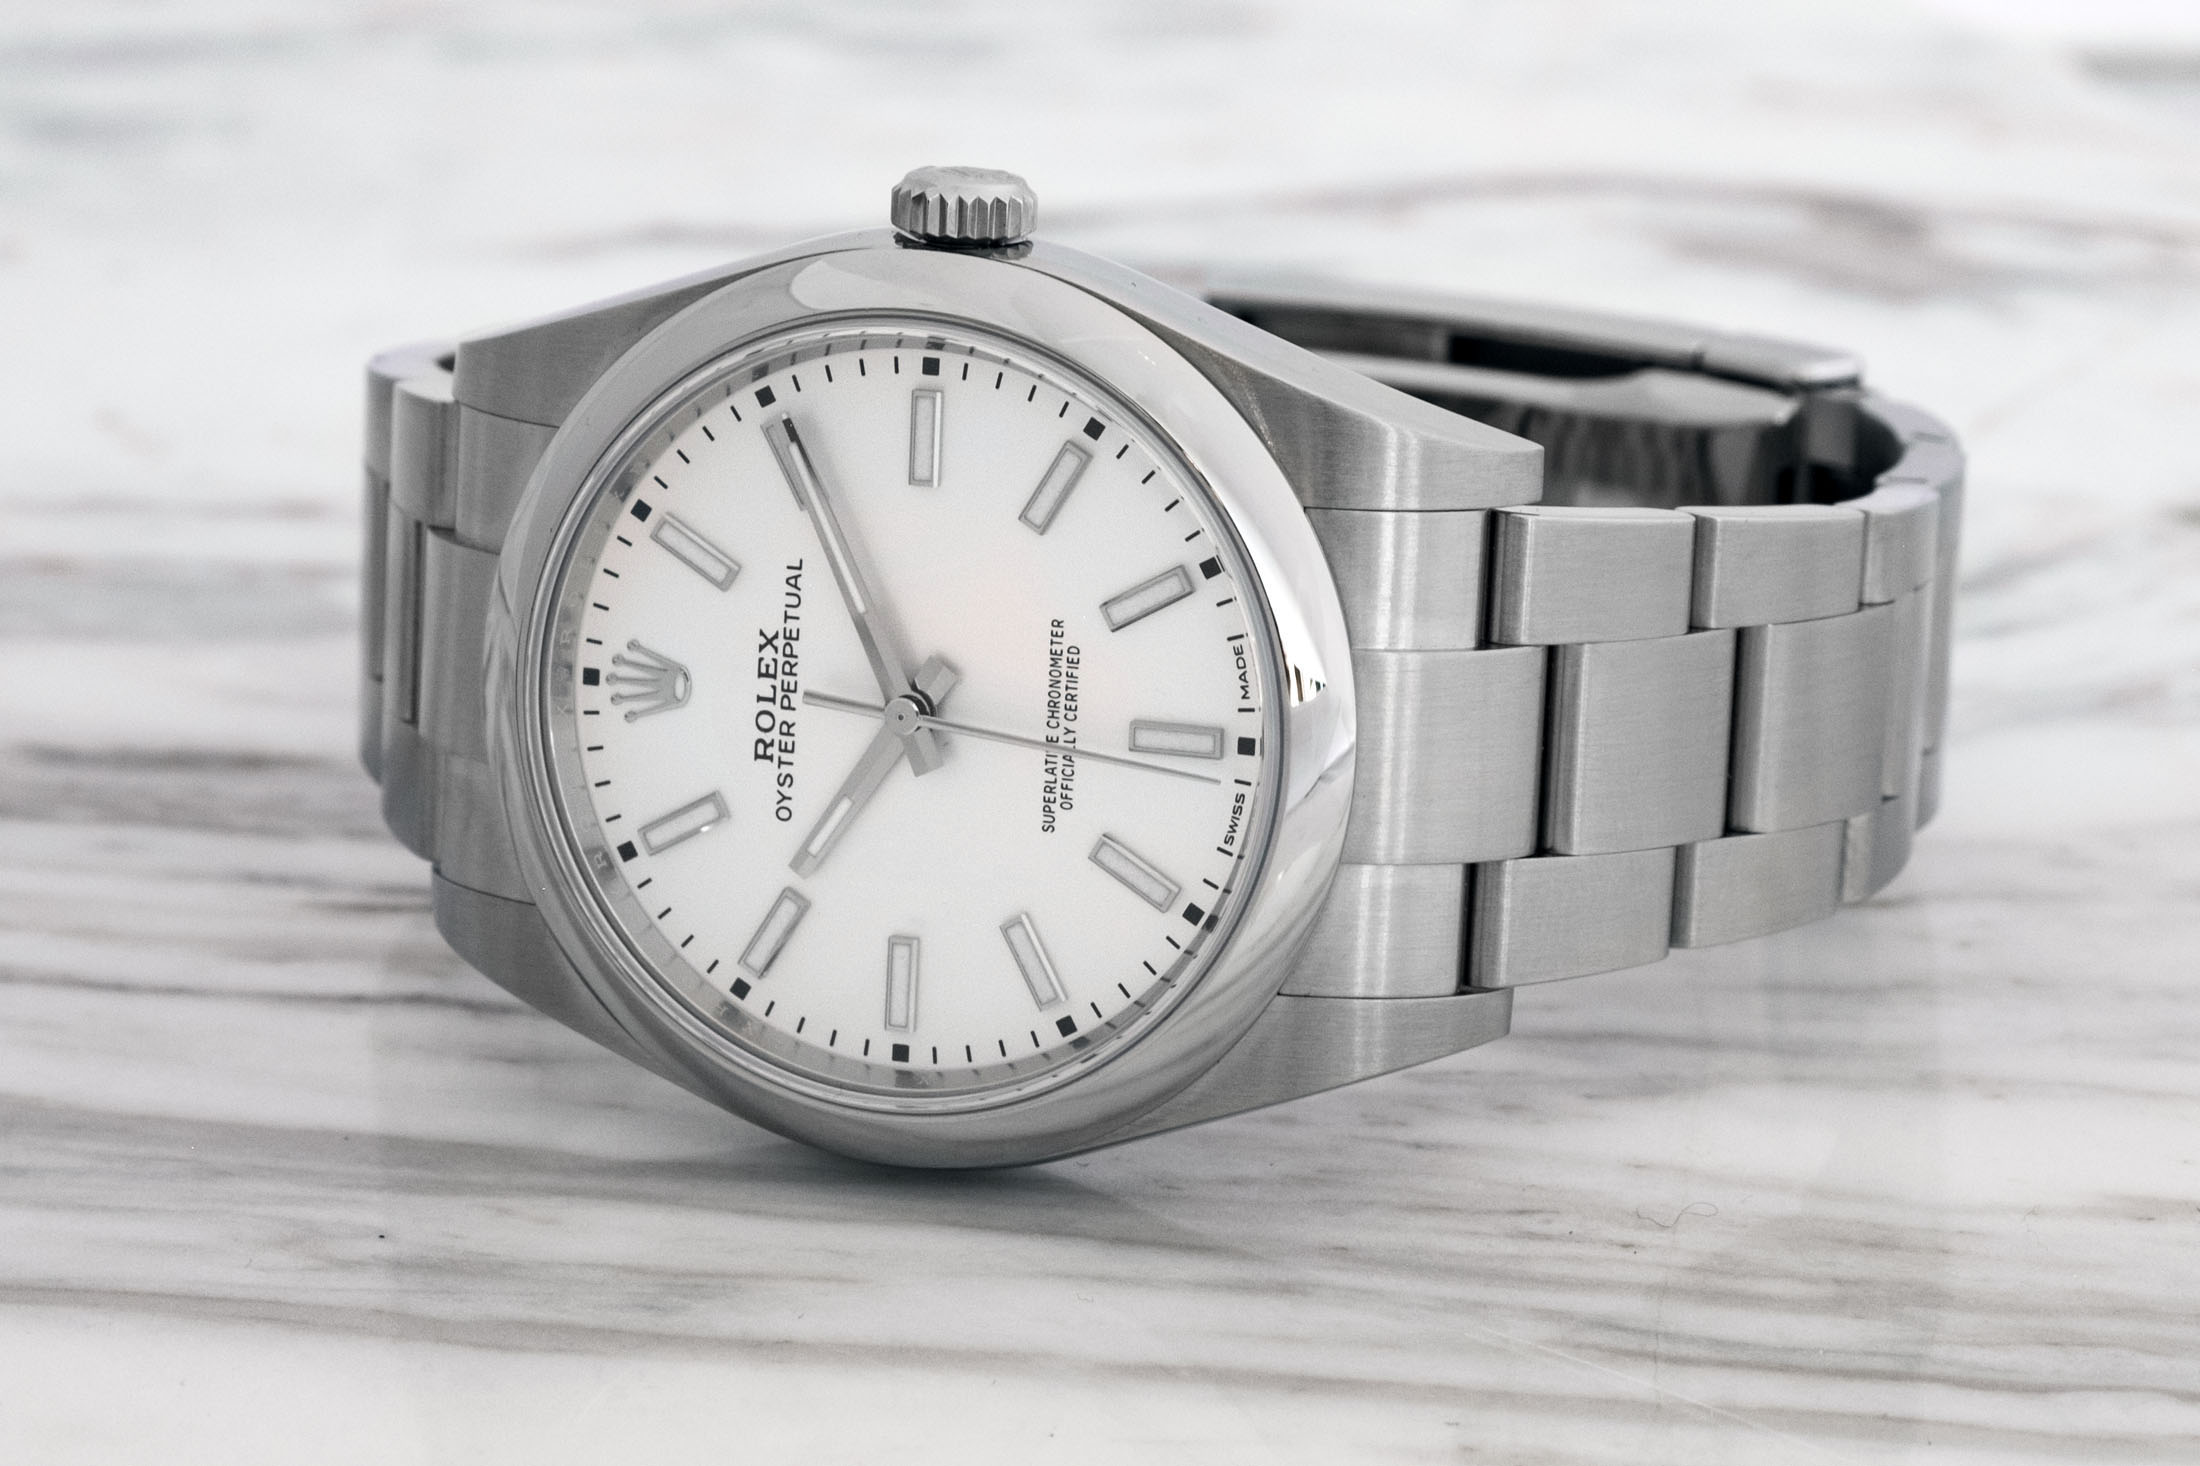 rolex oyster perpetual 11420